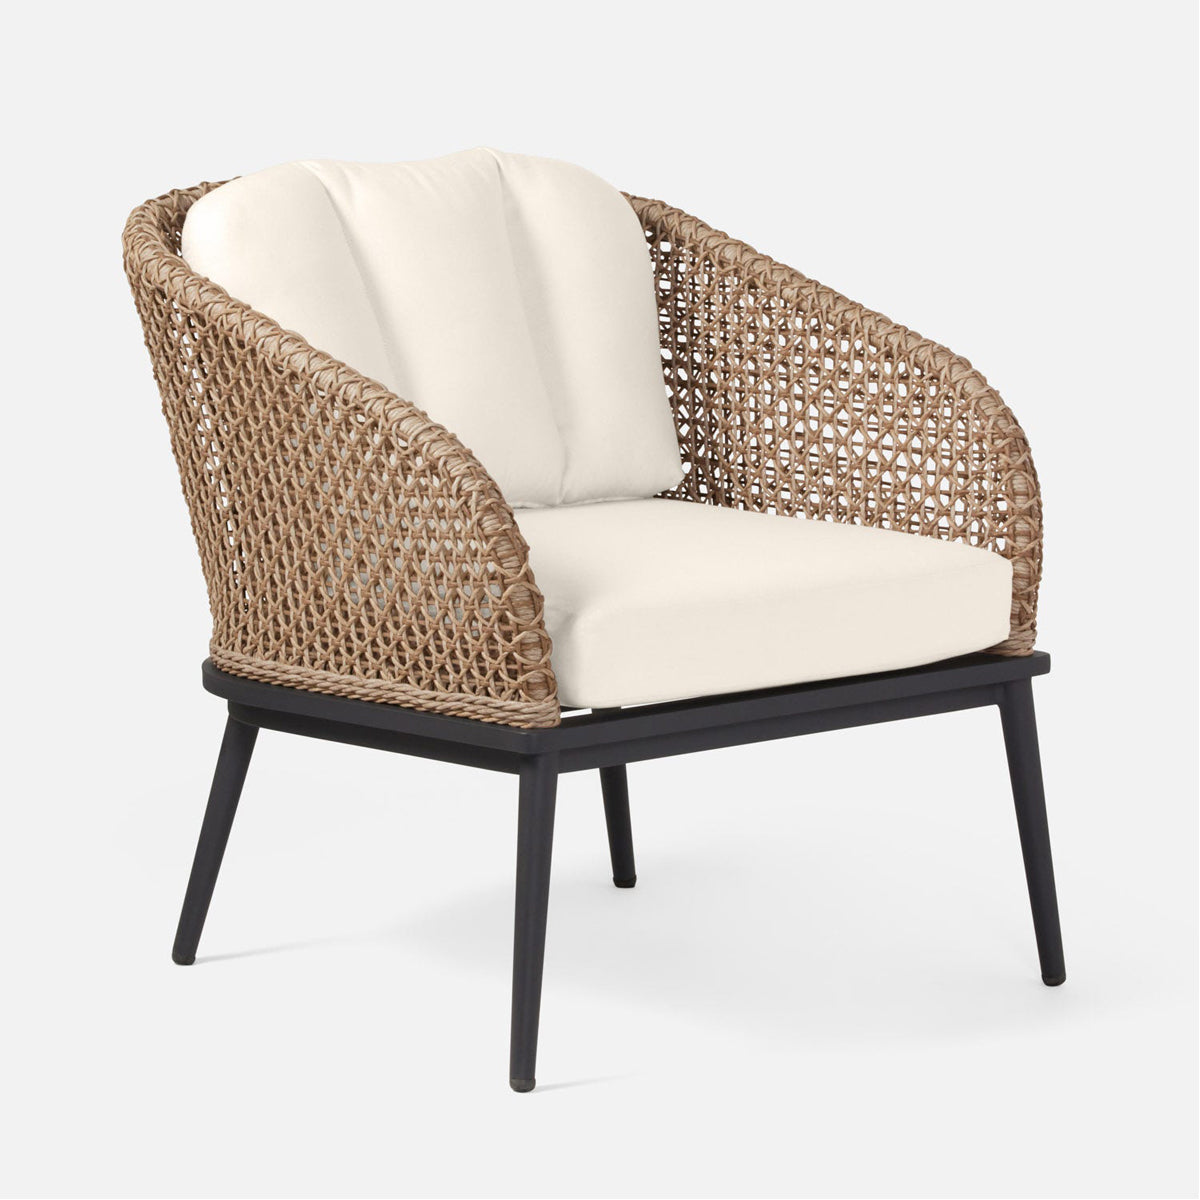 Made Goods Leandre Outdoor Lounge Chair in Weser Fabric